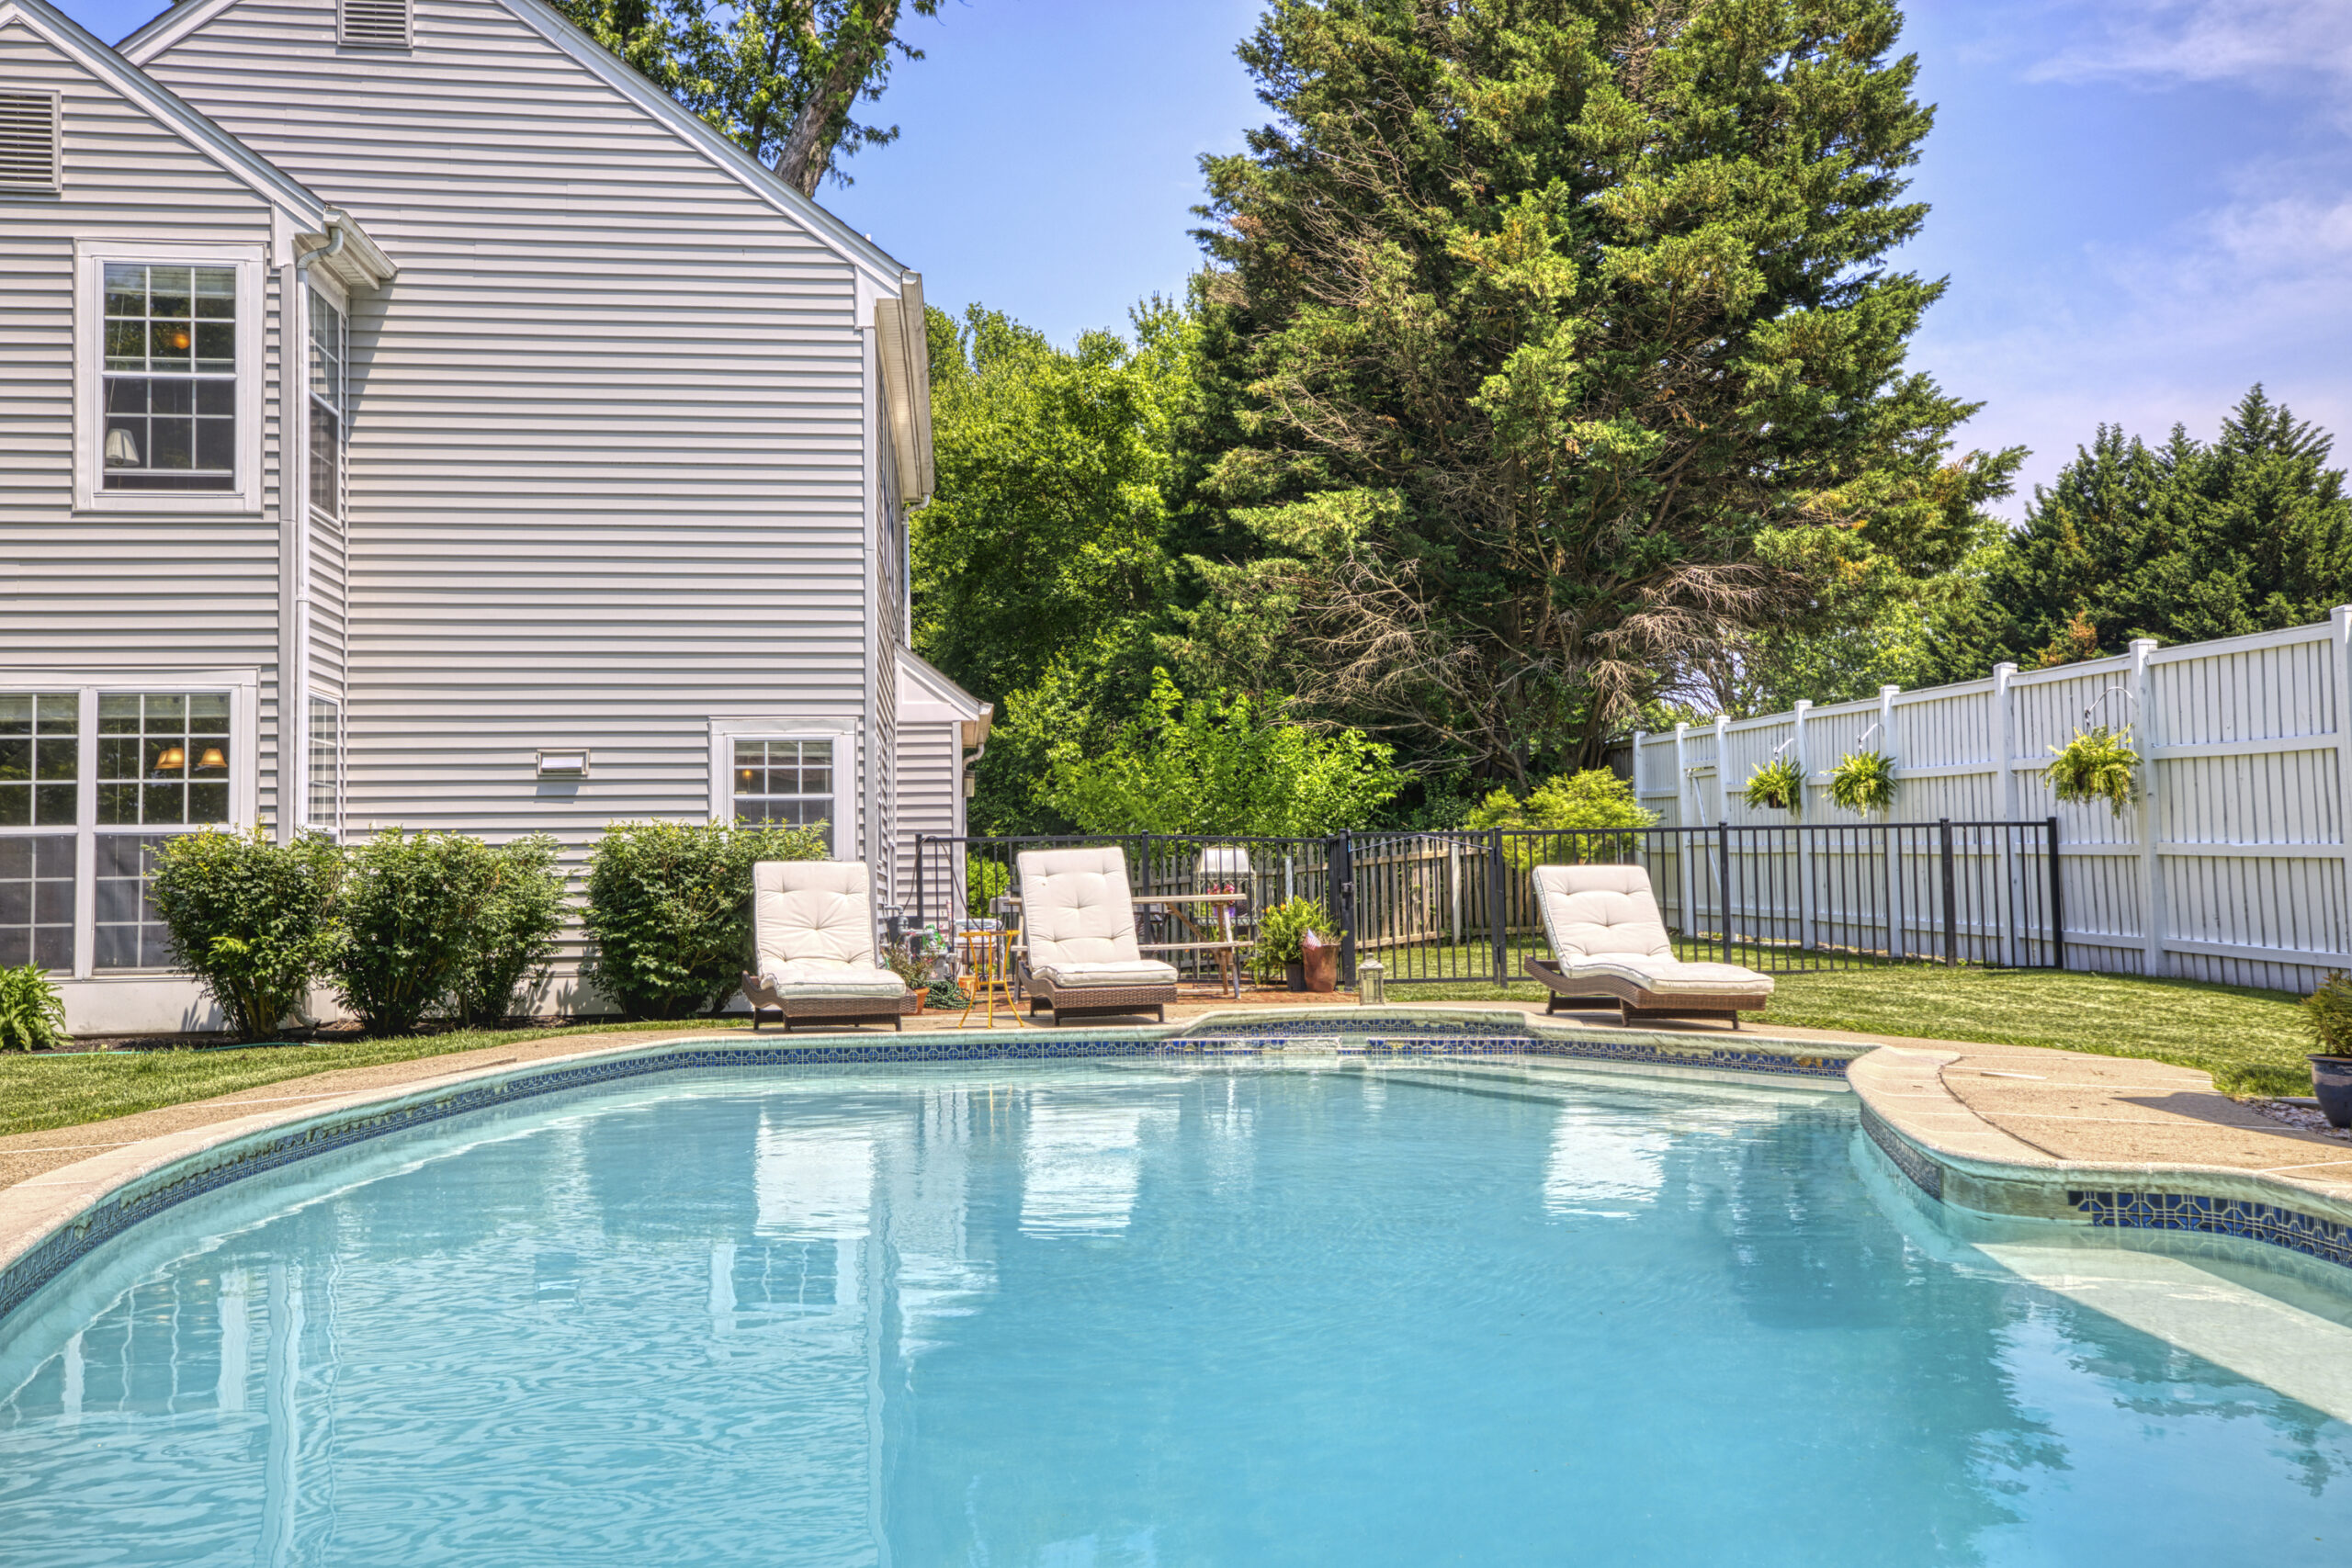 Professional exterior photo of 12309 Stalwart Court - showing the rear of the single family home with grey vinyl siding and the in-ground pool with black metal fence separating the patio area from the brick patio